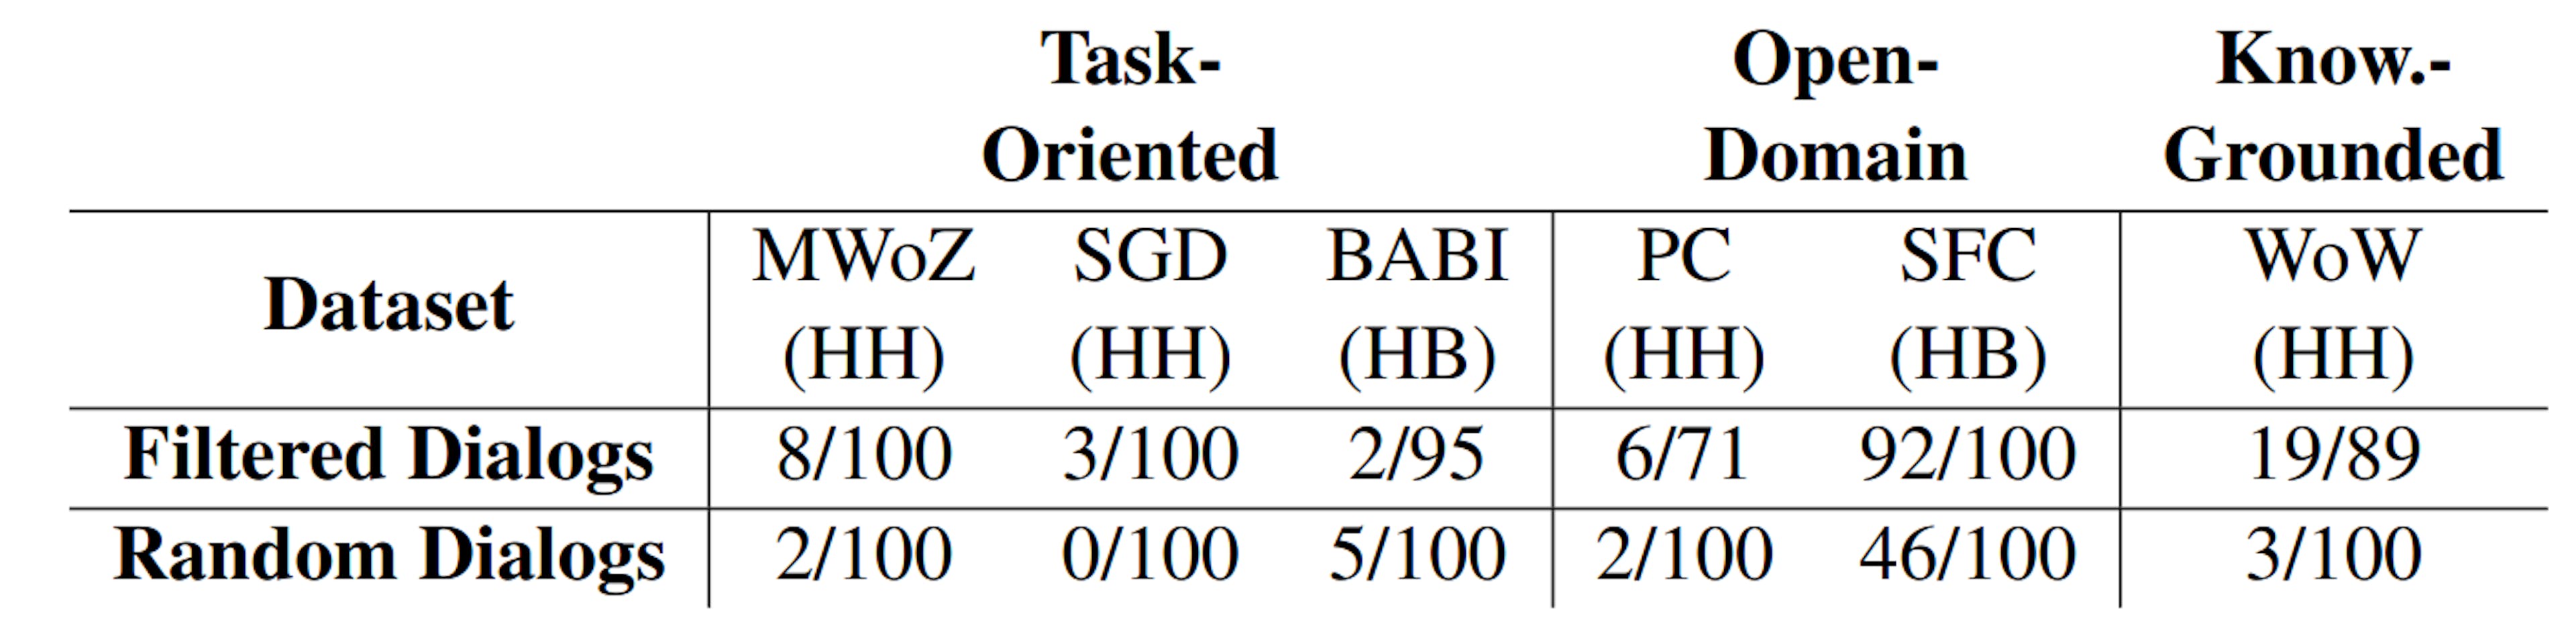 Table 7: The number of errors in comparison to the number of dialogs considered in this analysis for each dataset.